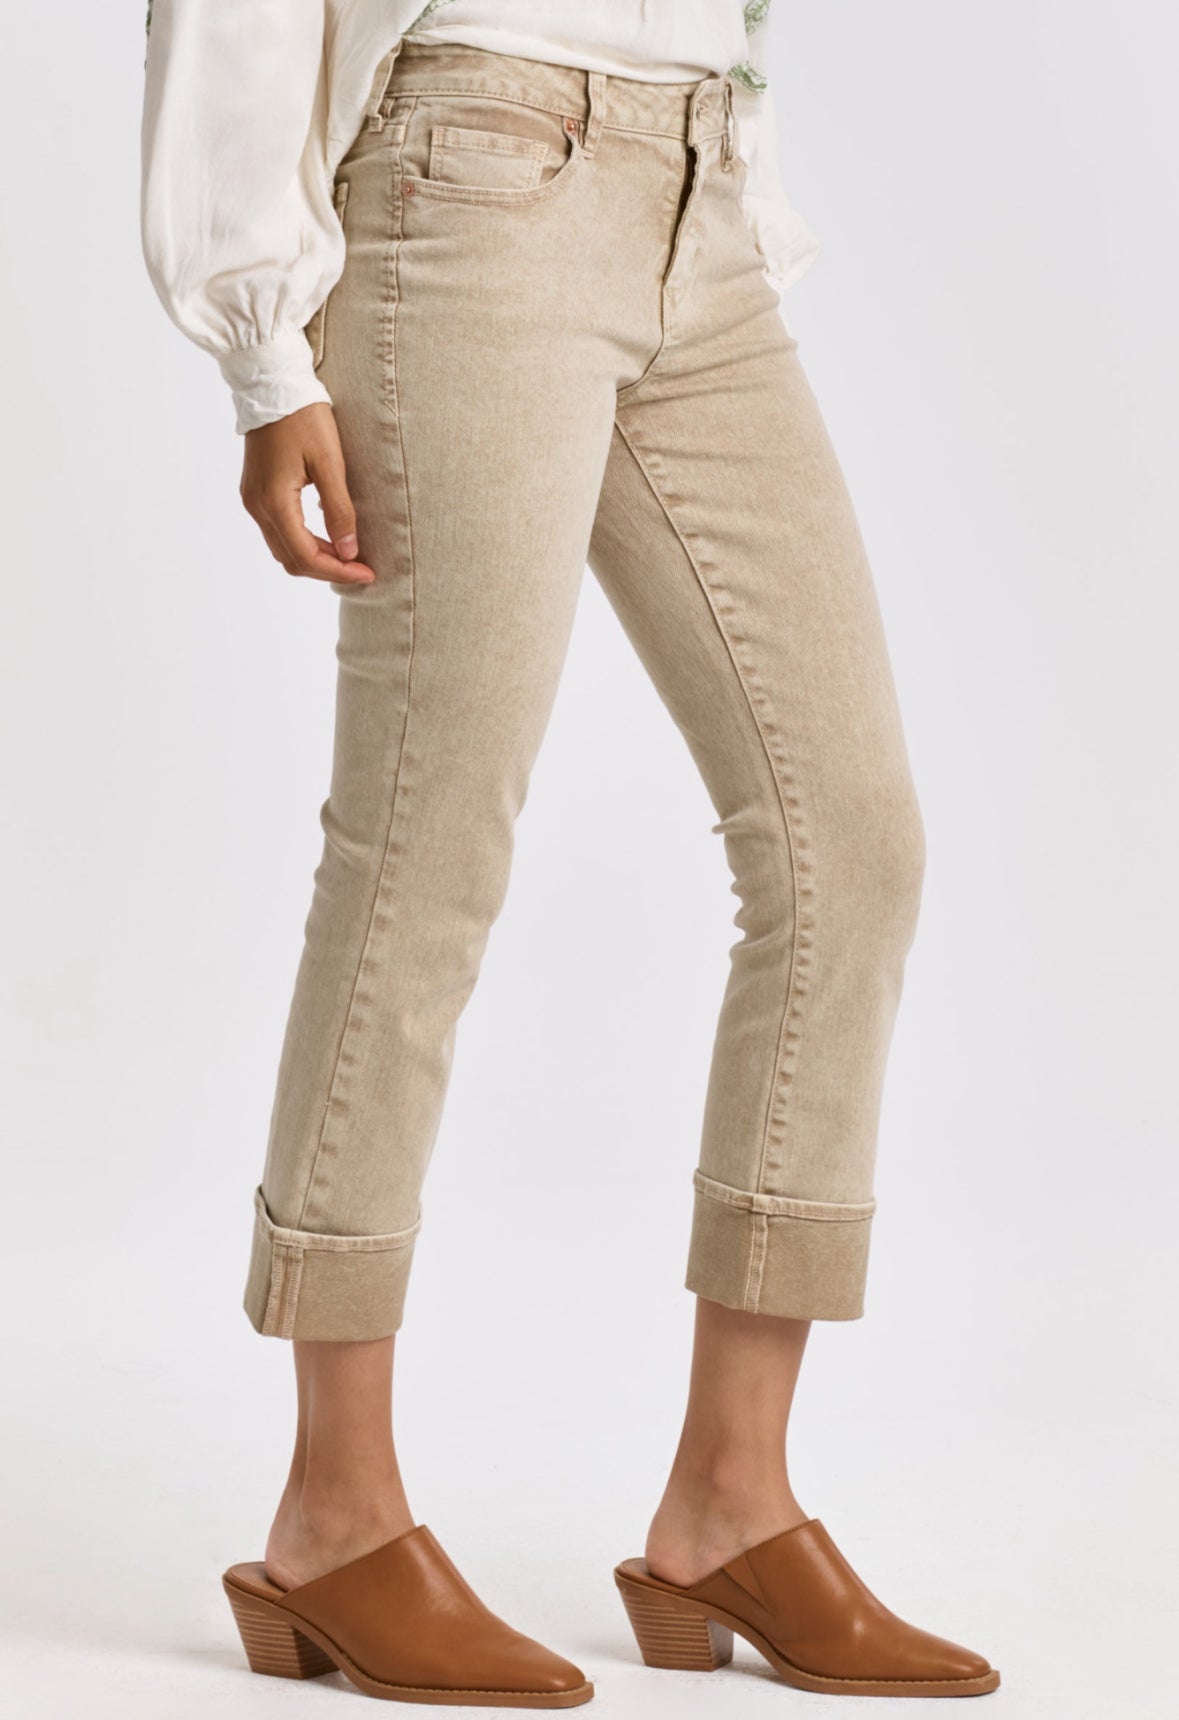 Golden Road Blaire Cuffed Jeans